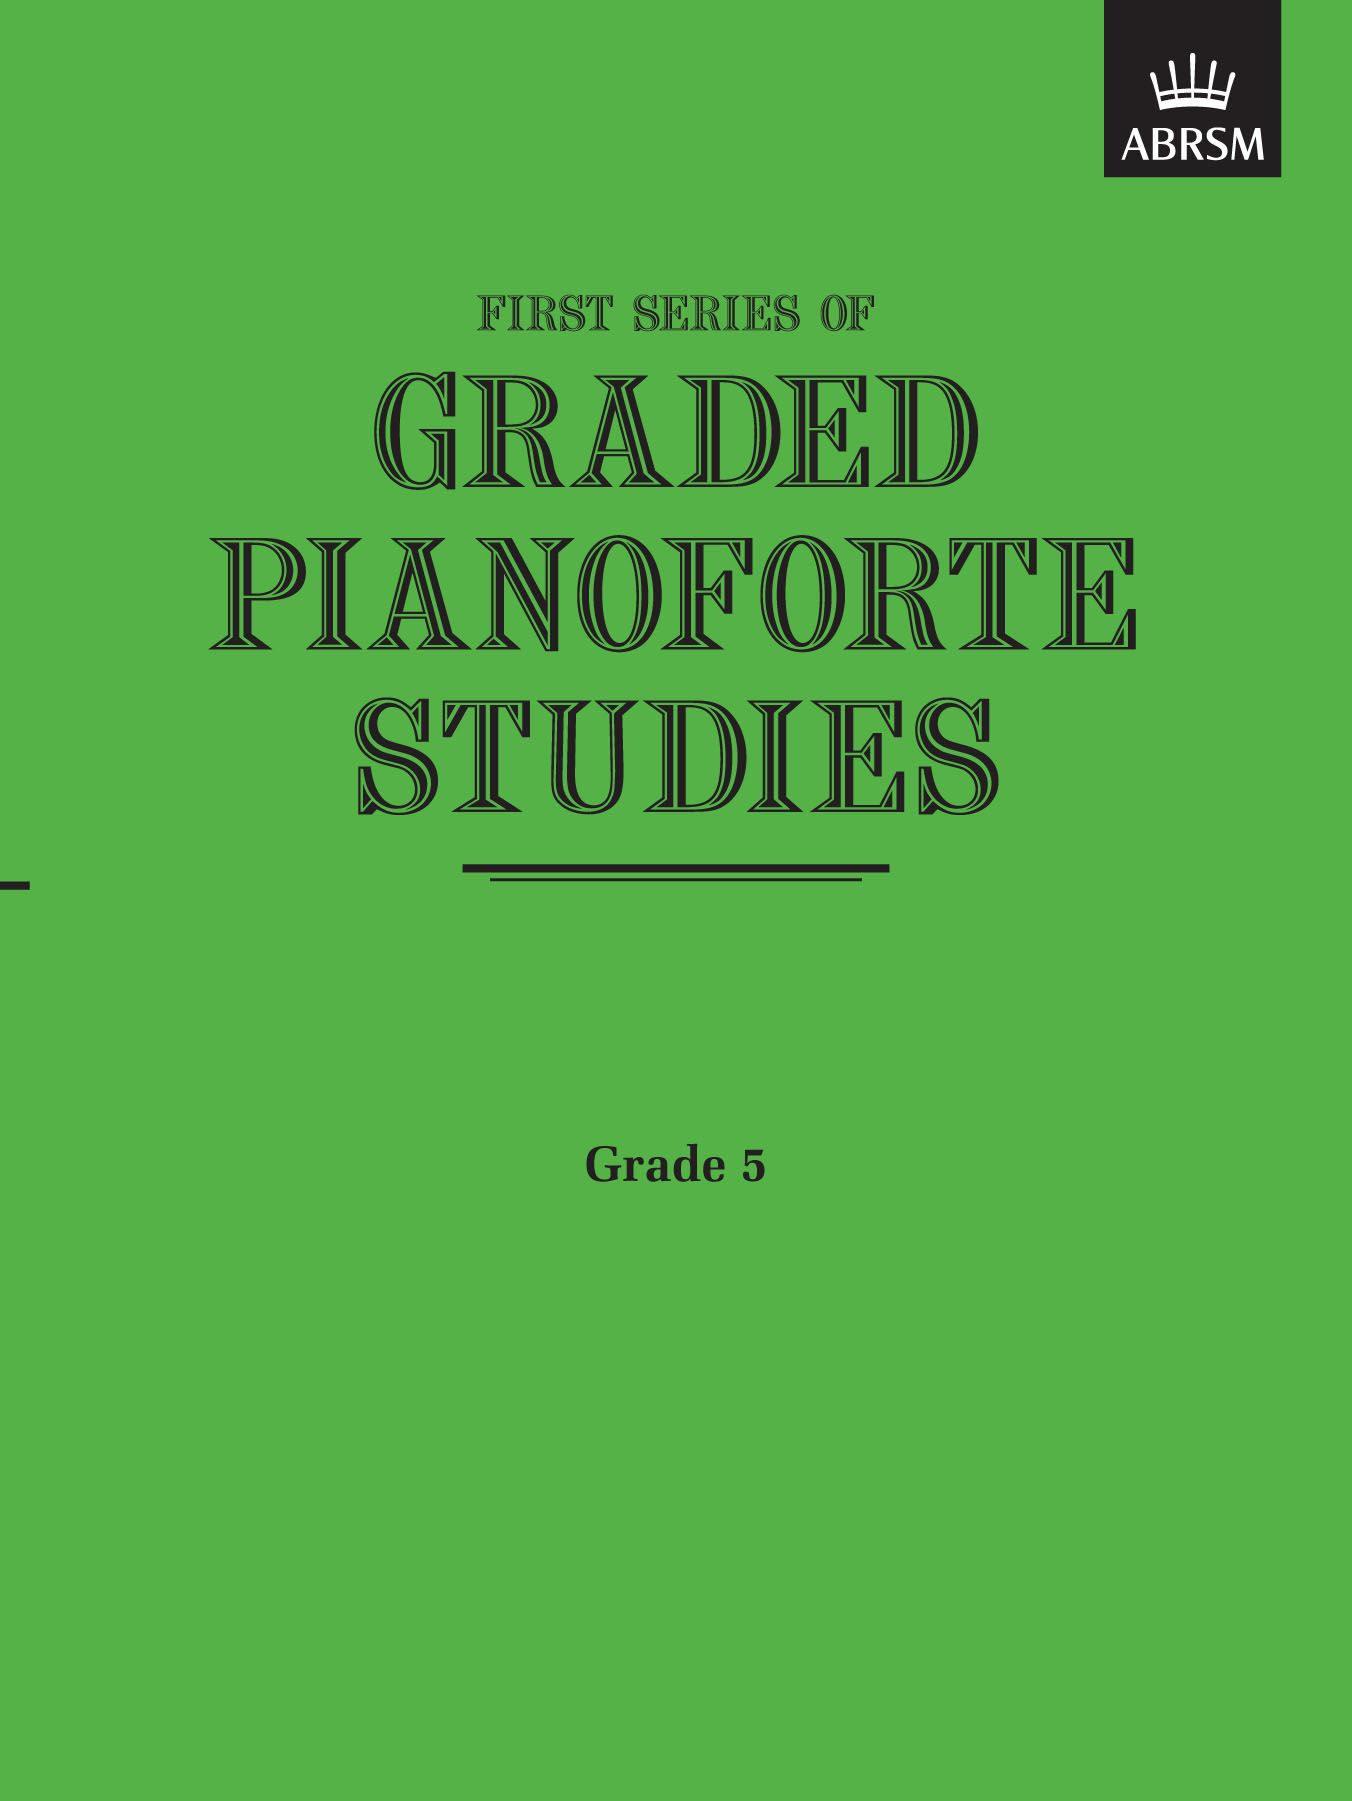 First Series of Graded Pianoforte Studies G5